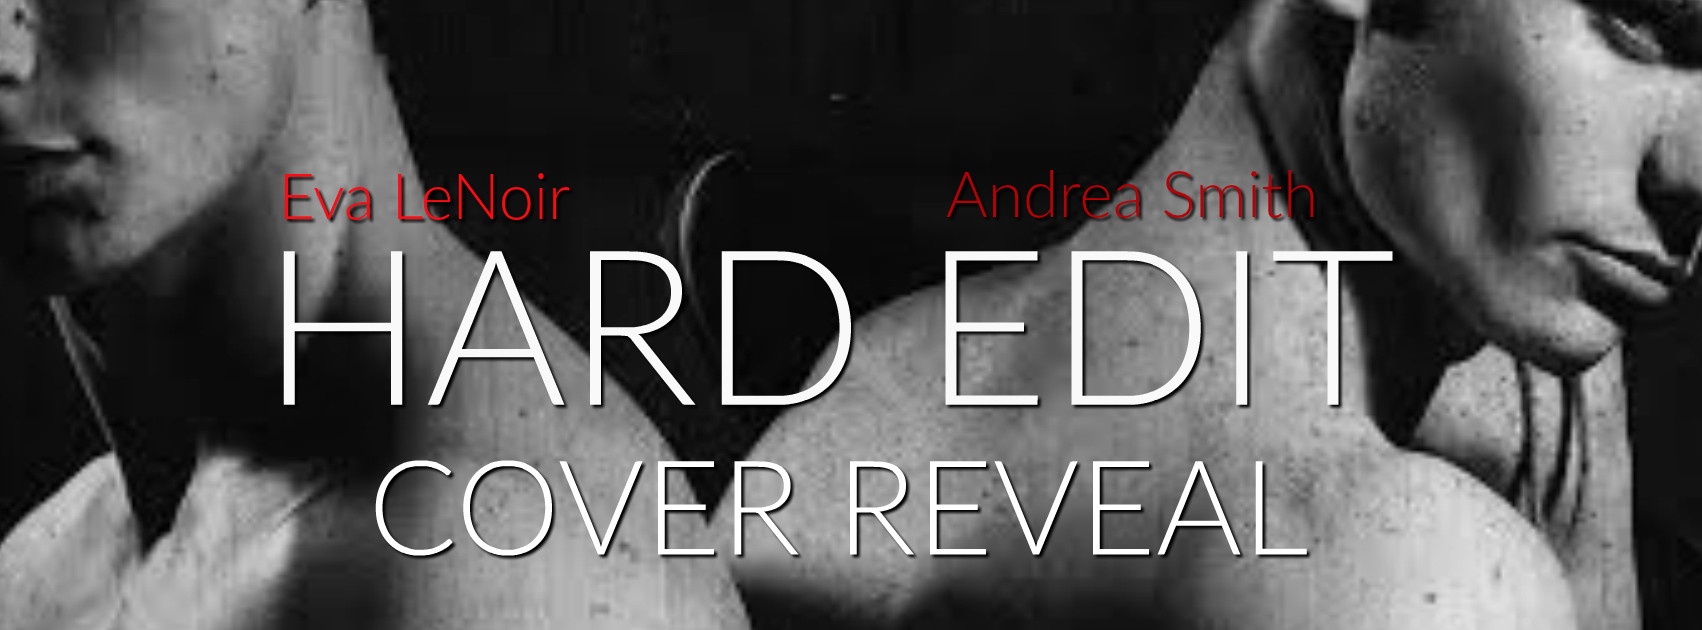 Hard Edit Cover Reveal!